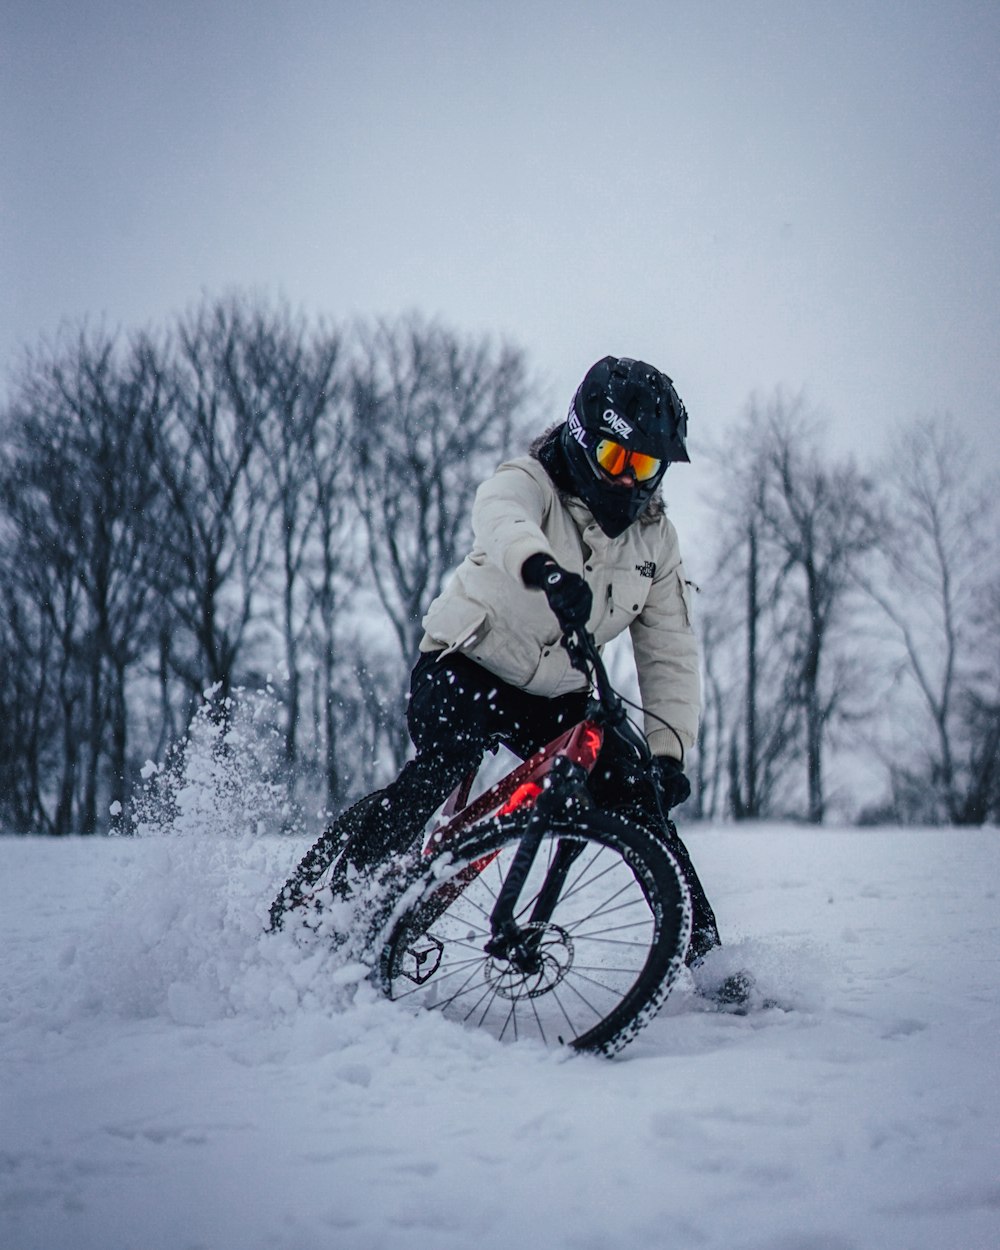 man in white jacket riding on black mountain bike on snow covered ground during daytime